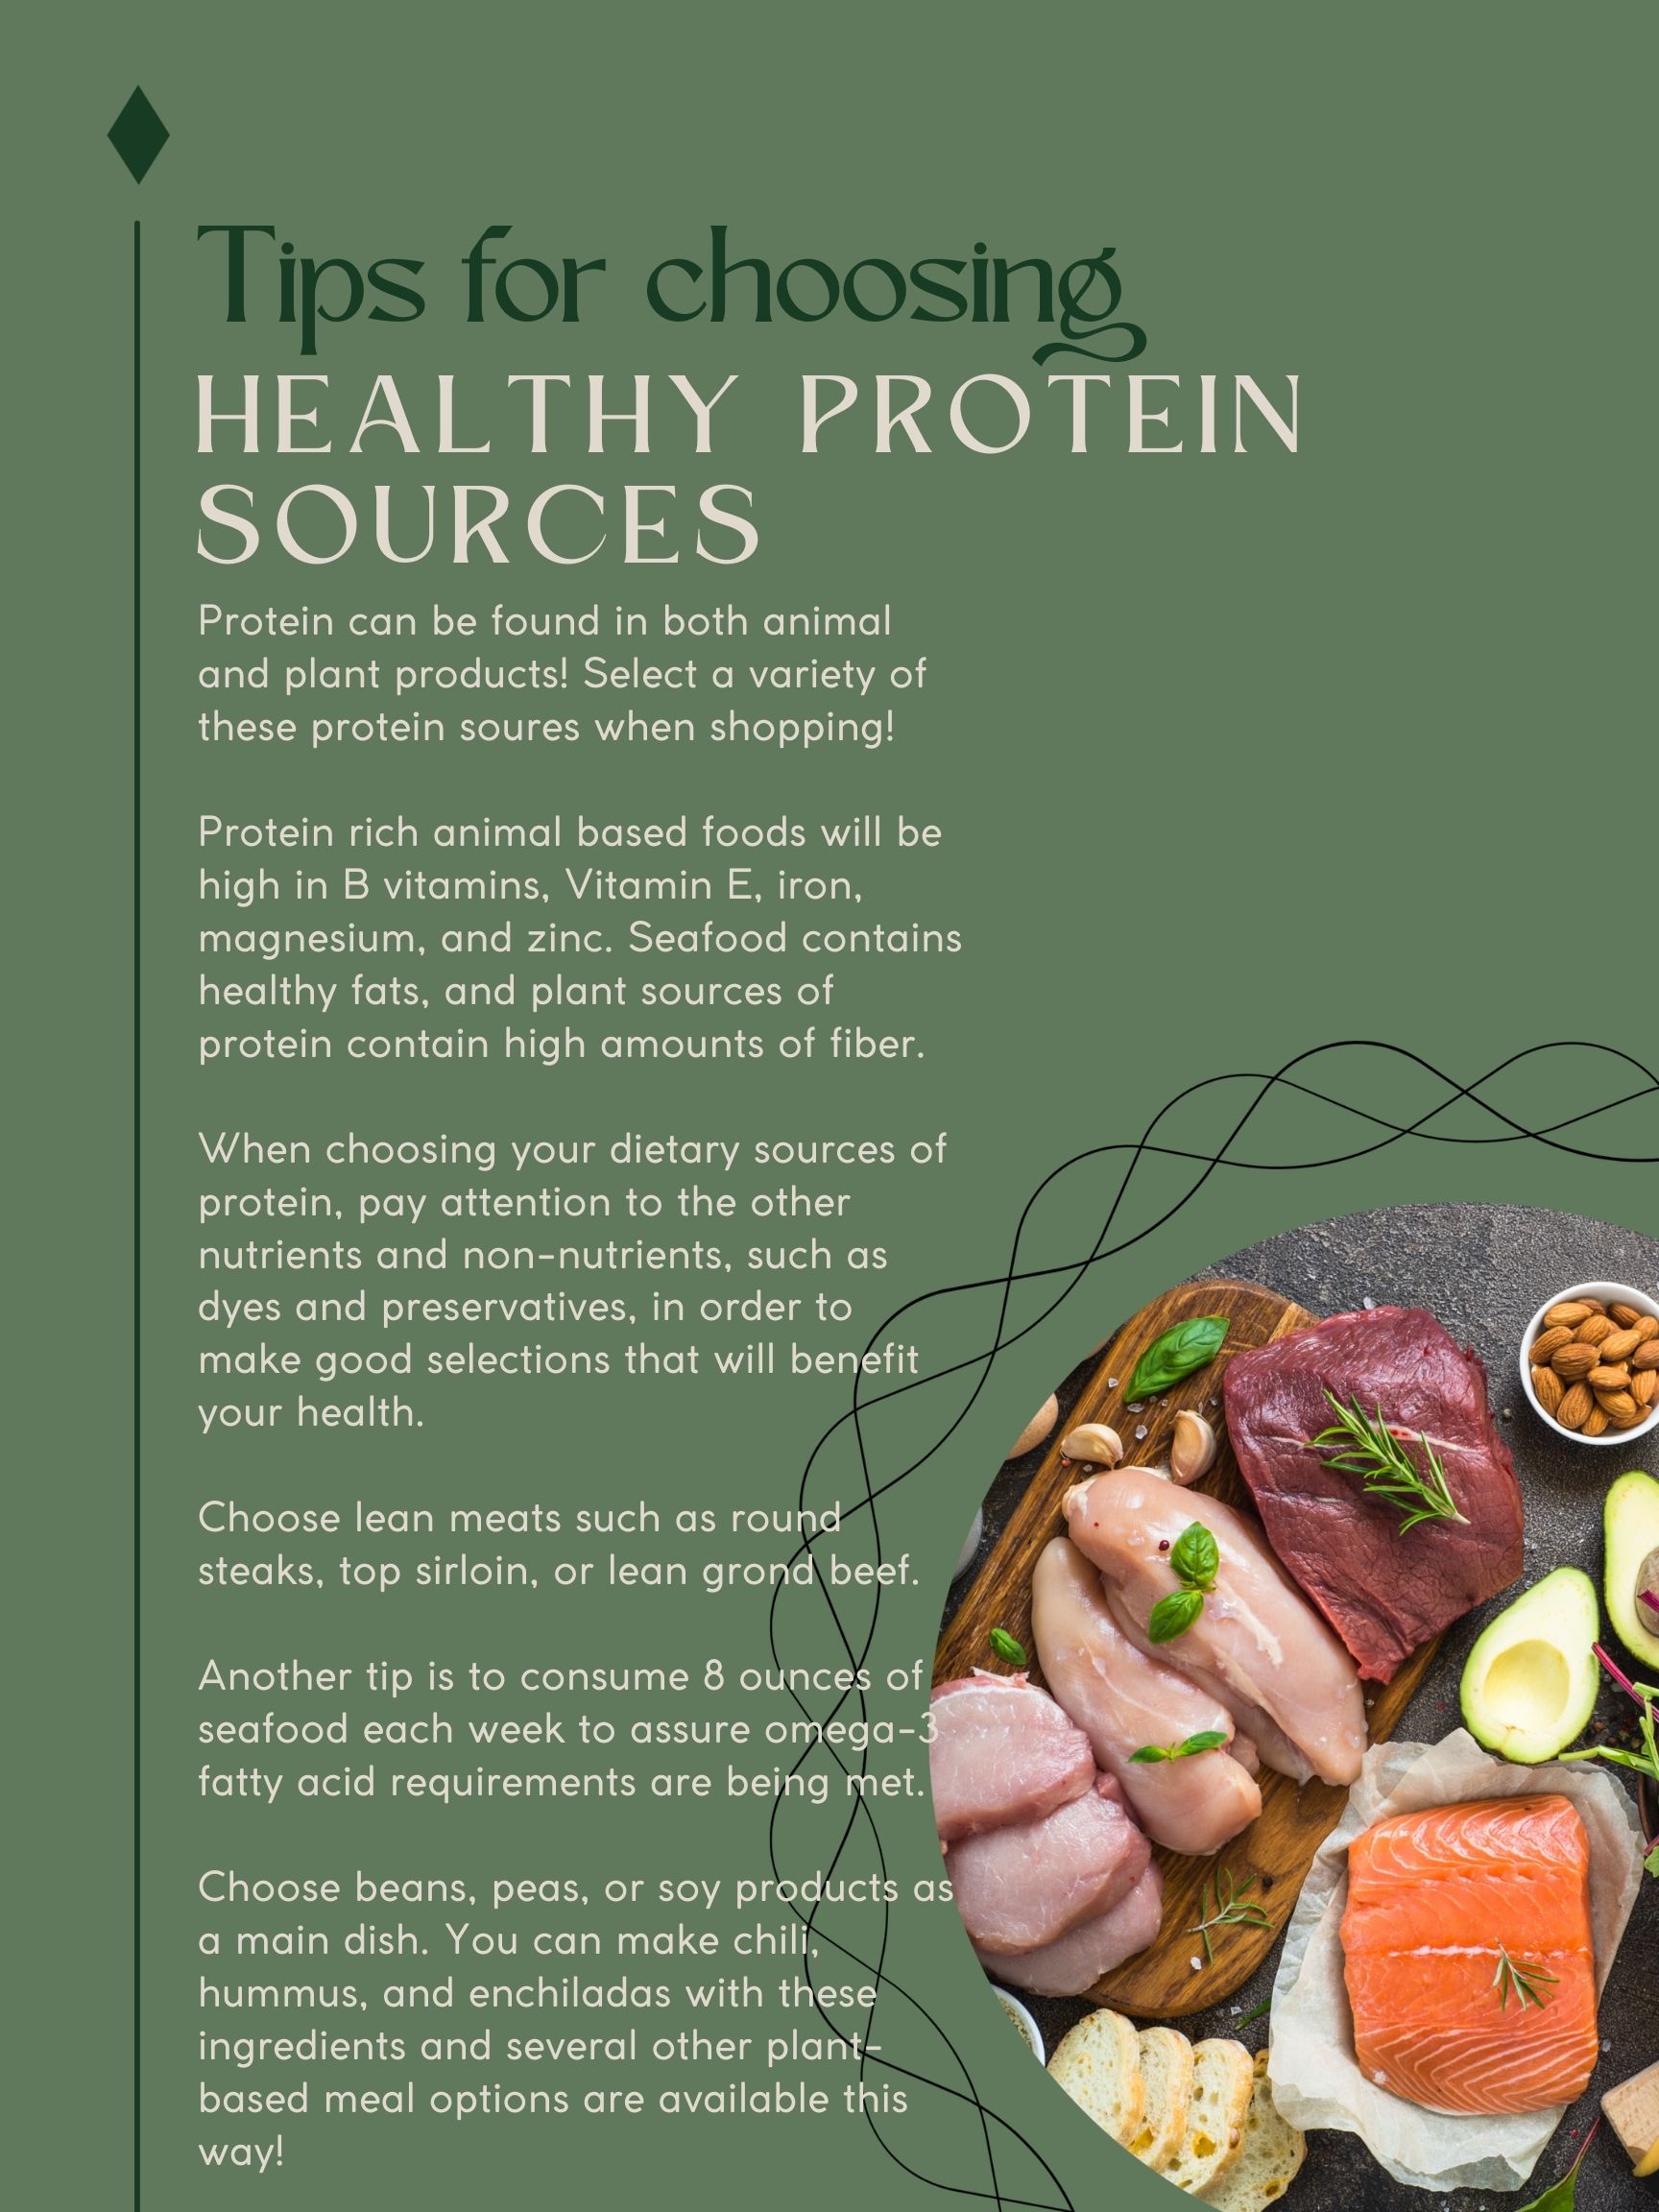 Infographic summarizing tips for choosing healthy protein sources